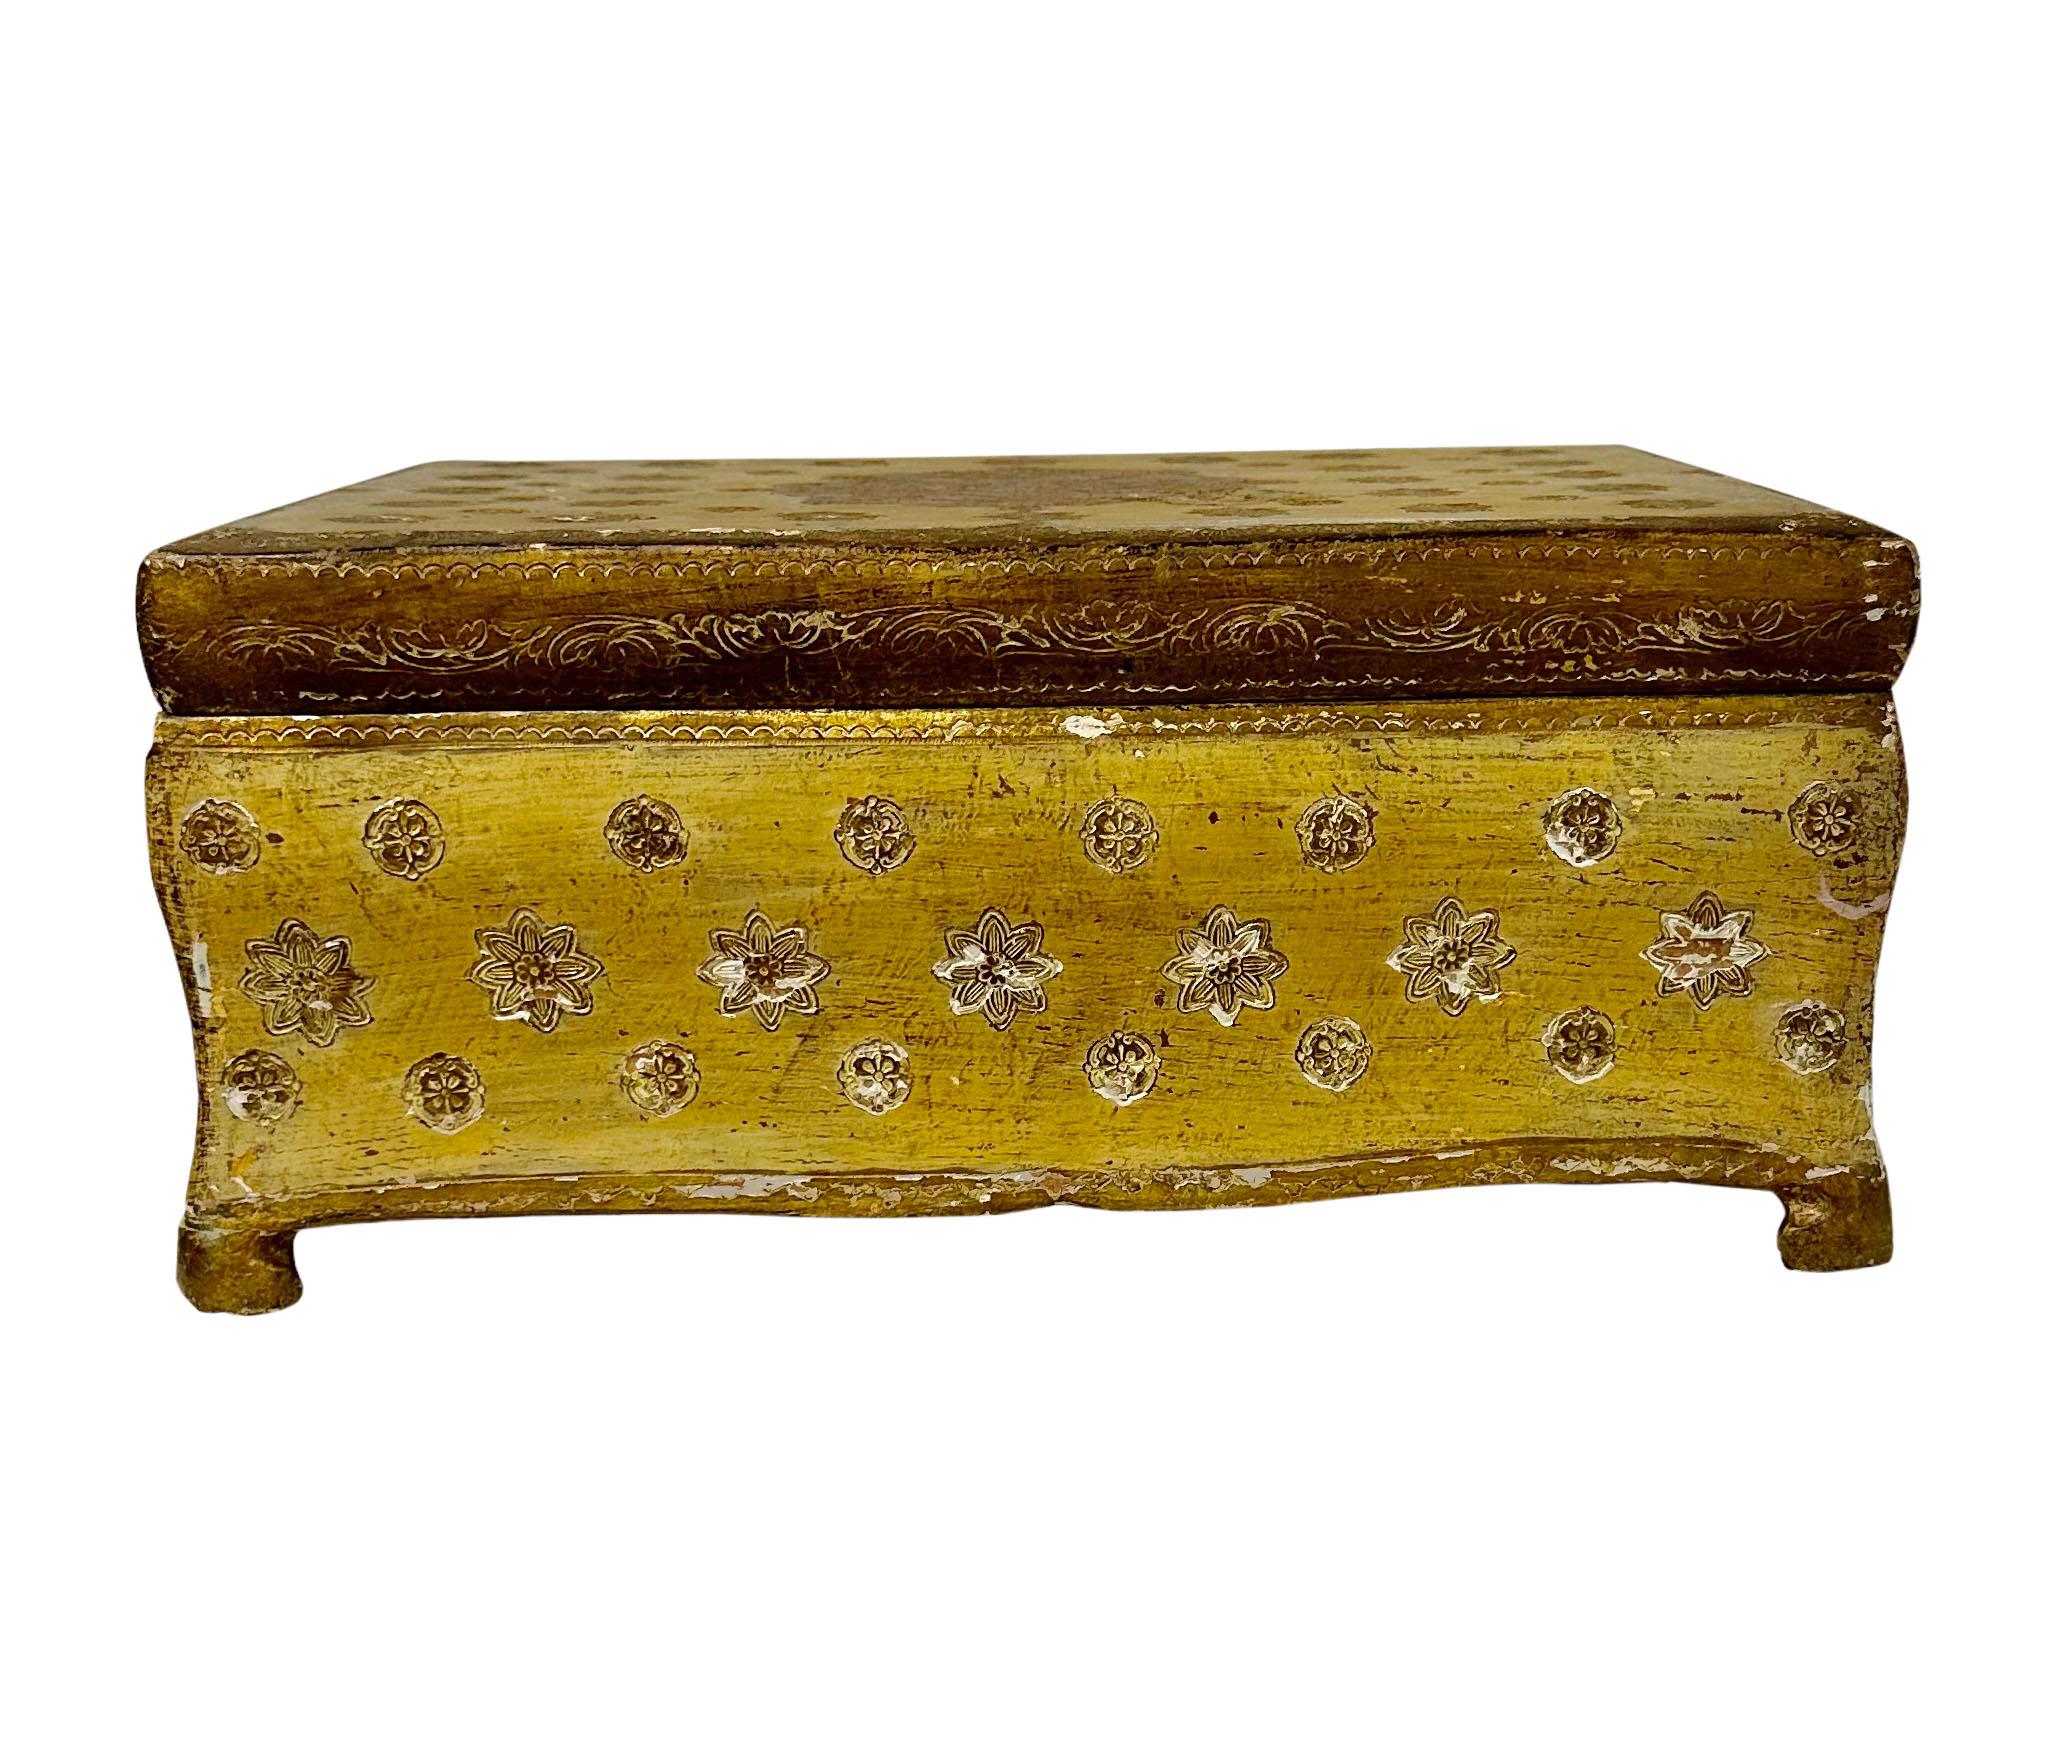 A Florentine box from Italy from the turn of the century. Nice patina and a wonderful large box.